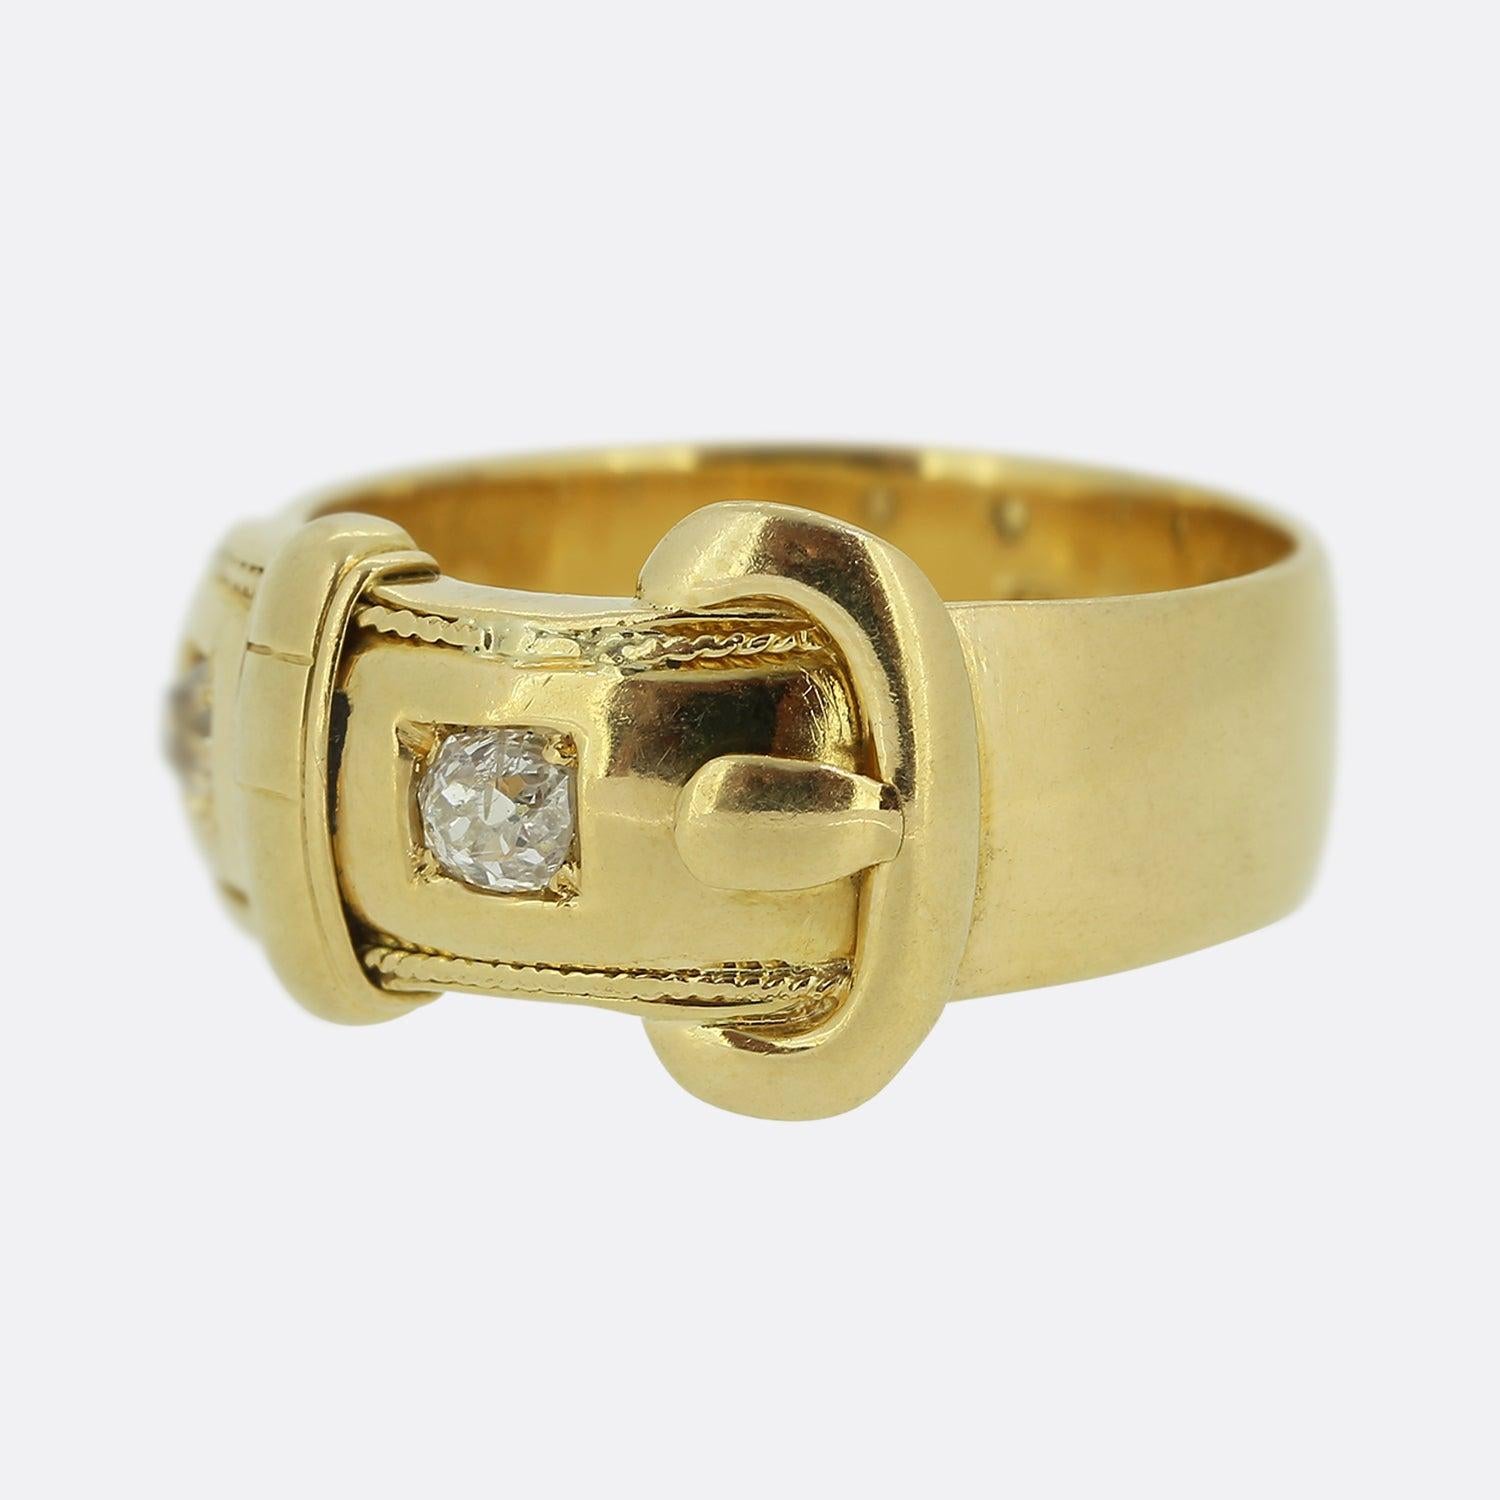 Here we have an 18ct yellow gold ring from the Victorian era. This antique piece has been crafted into the shape of a belt buckle and plays host to two chunky old cut diamonds which sit claw set amidst fine milgrain detailing and an otherwise